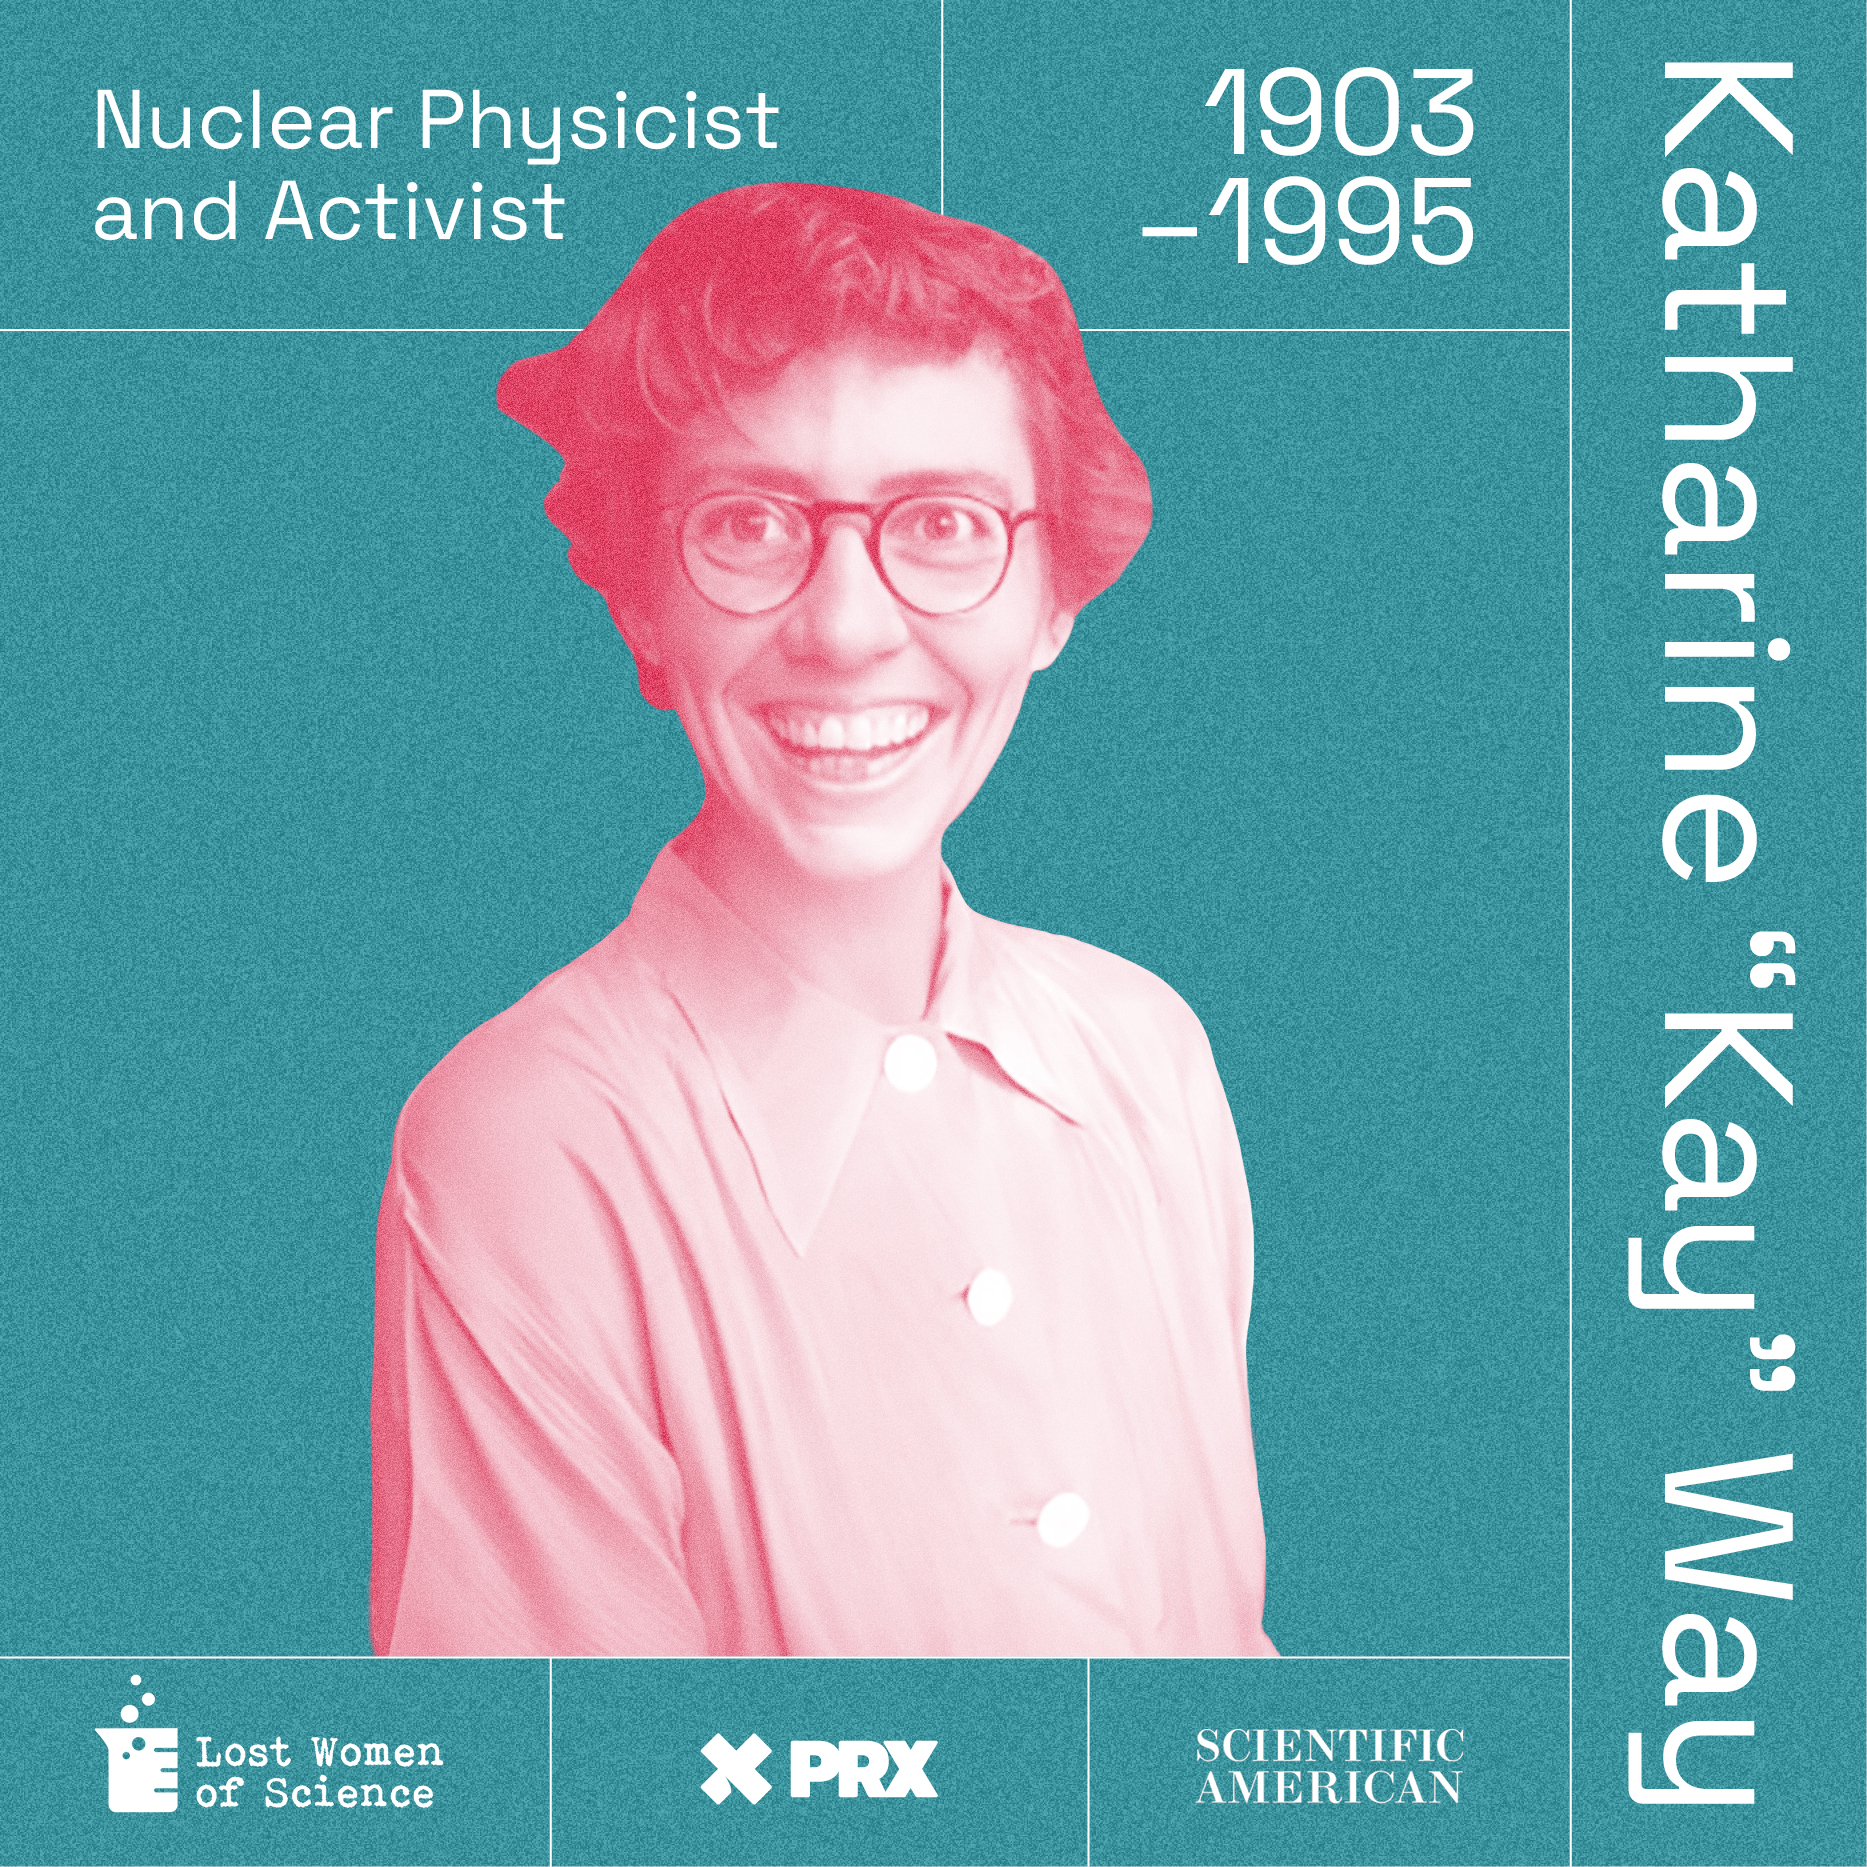 Thumbnail for "Best Of: Meet the Physicist who Spoke Out Against the Bomb She Helped Create".